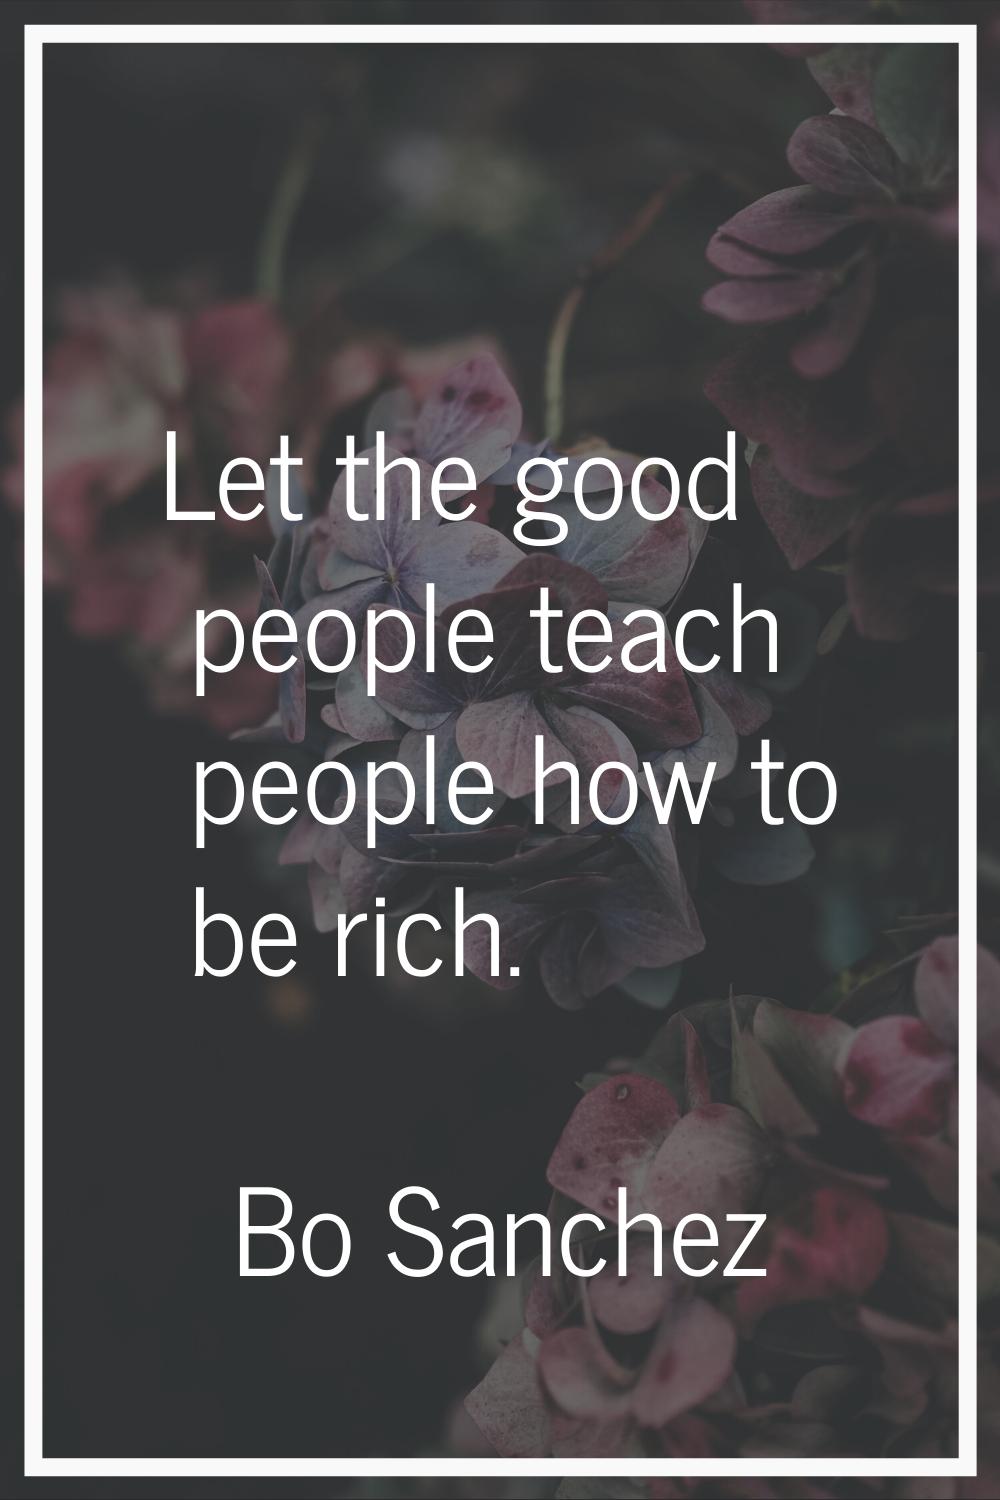 Let the good people teach people how to be rich.